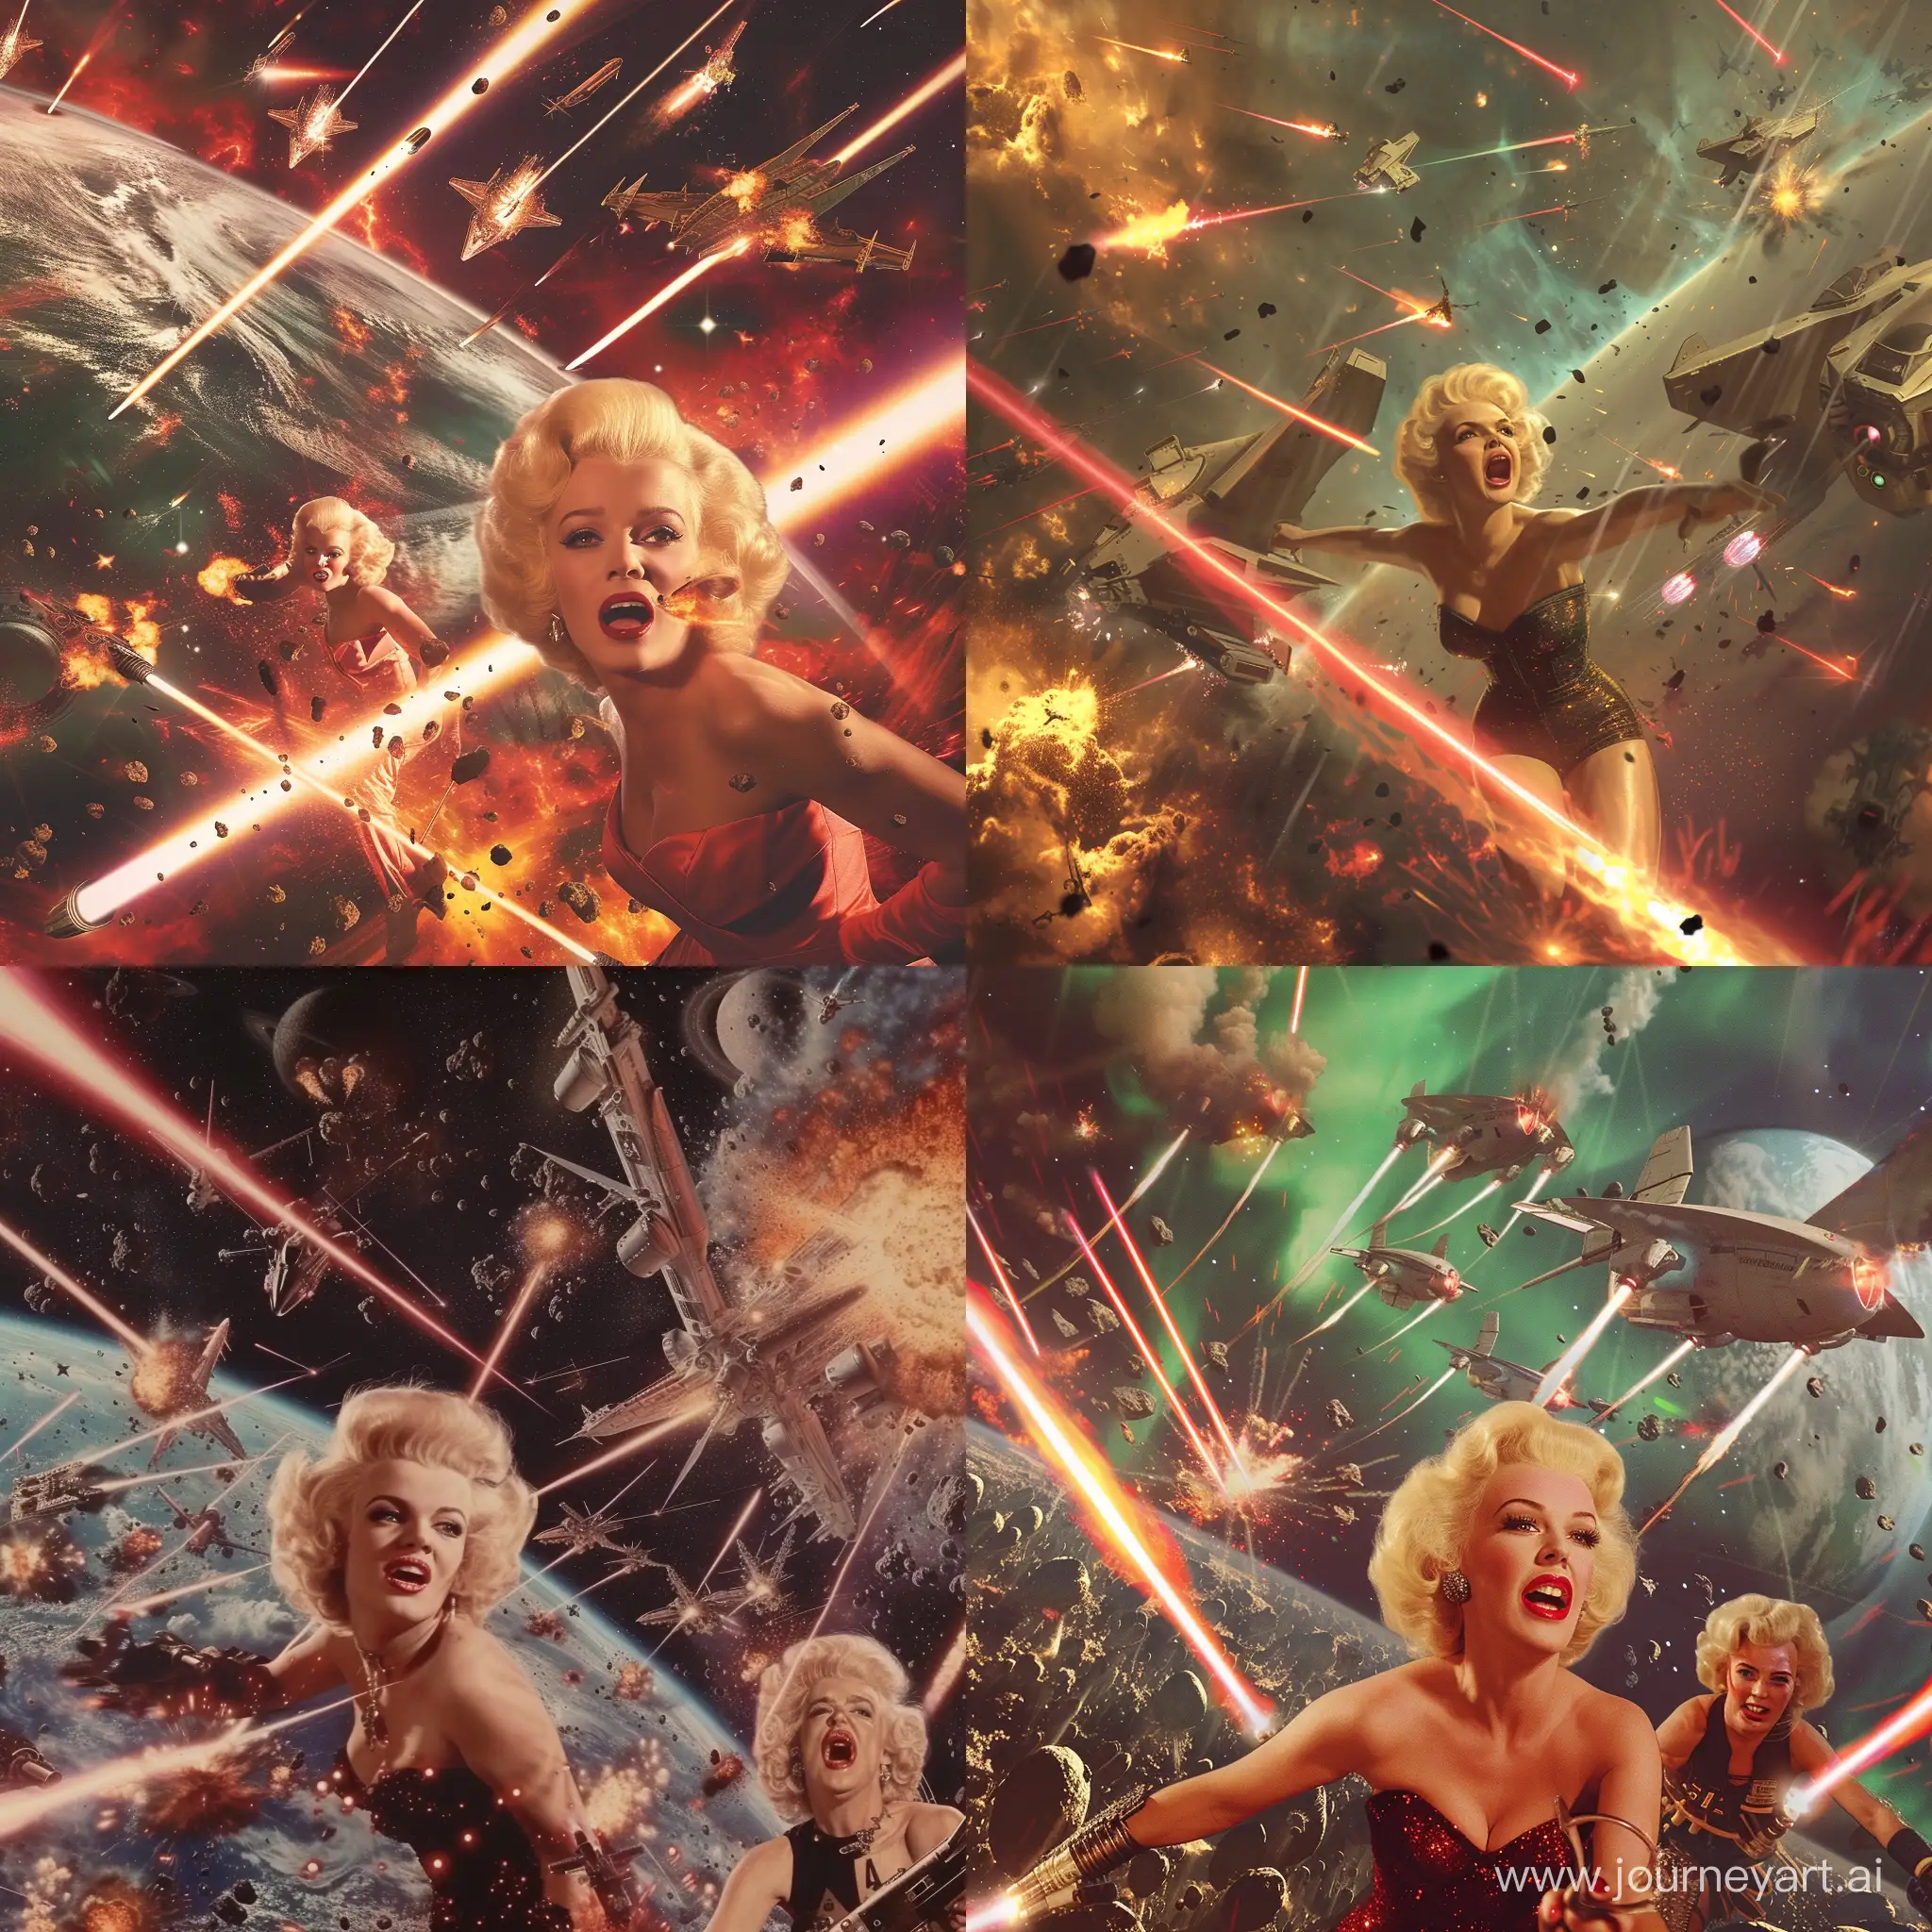 Marilyn-Monroe-in-Intergalactic-Space-Battle-with-Female-Space-Pirates